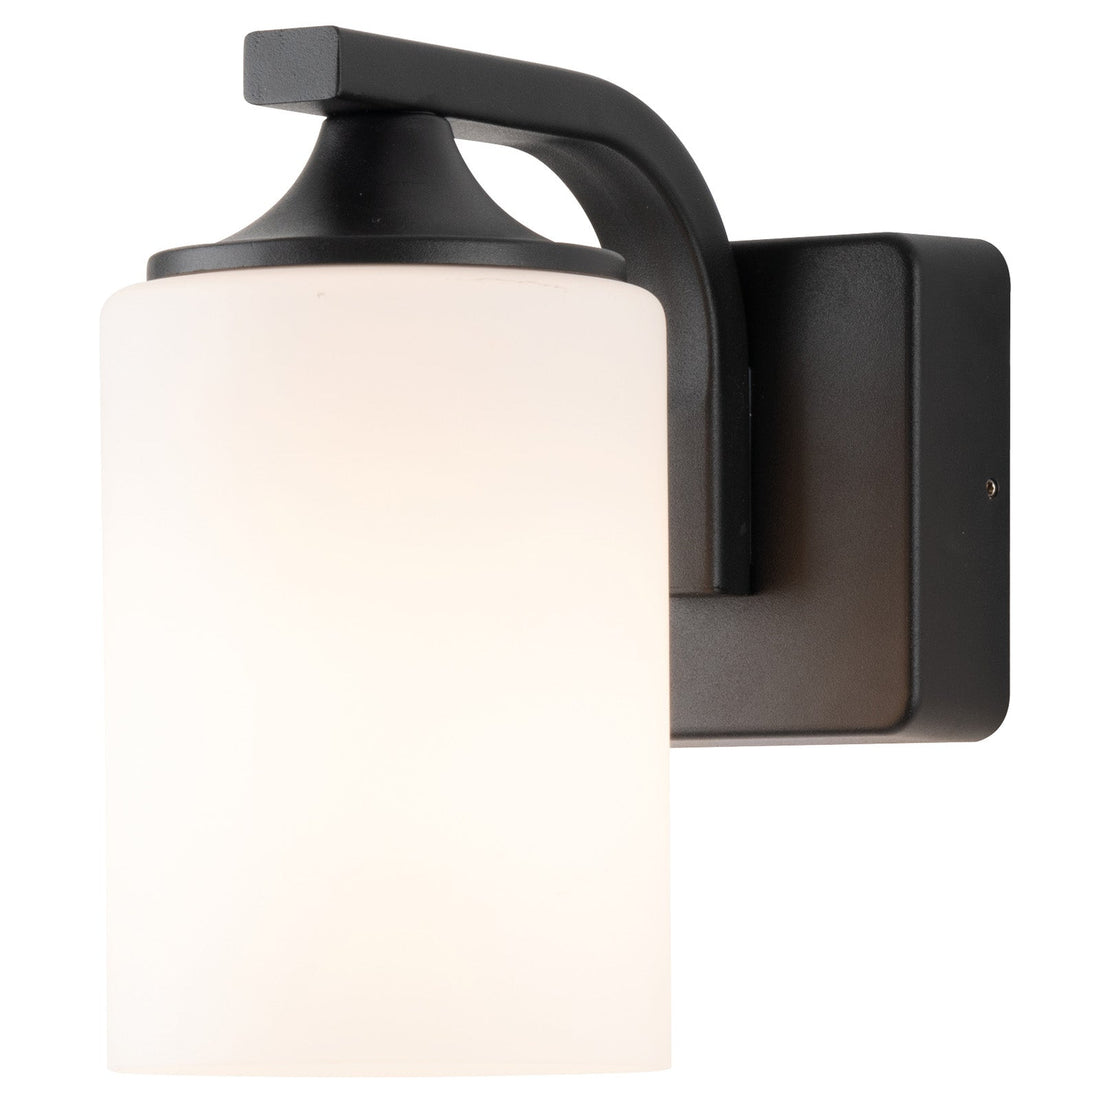 Elan Frosted Glass Classic Coach Exterior Wall Light